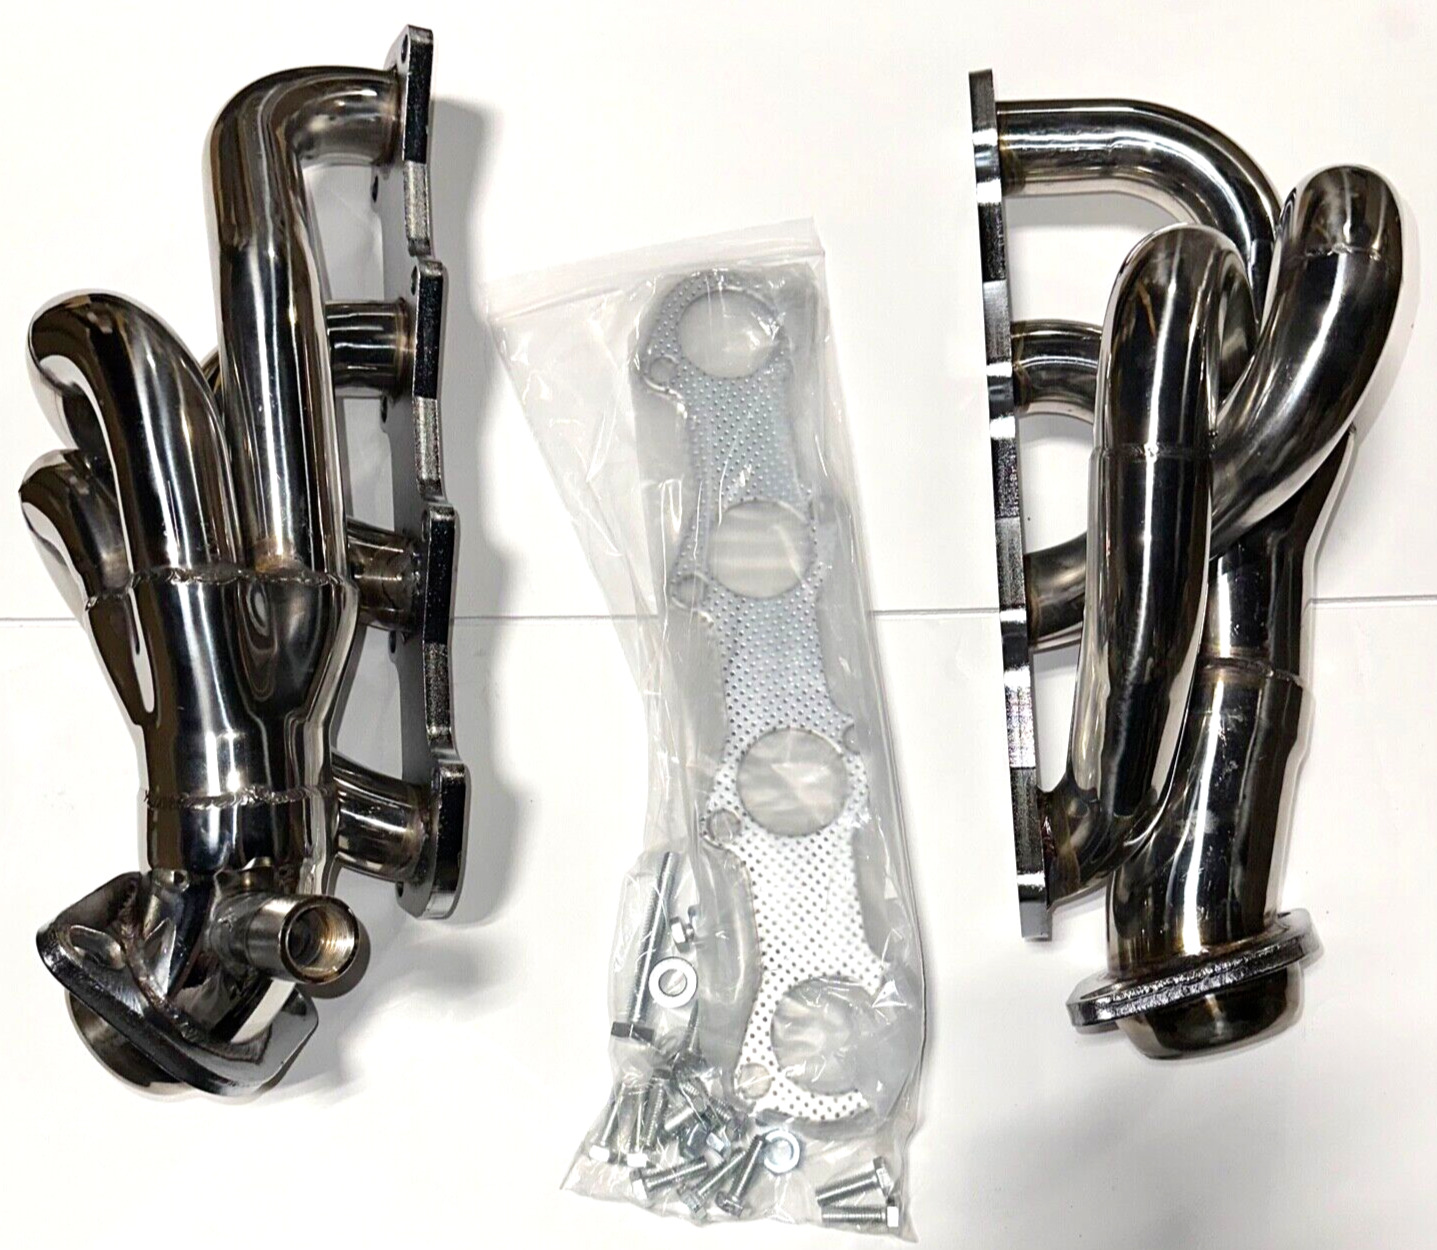 1997-03 Ford F150 F250 Expedition 4.6L V8 Stainless Steel Shorty Exhaust Headers